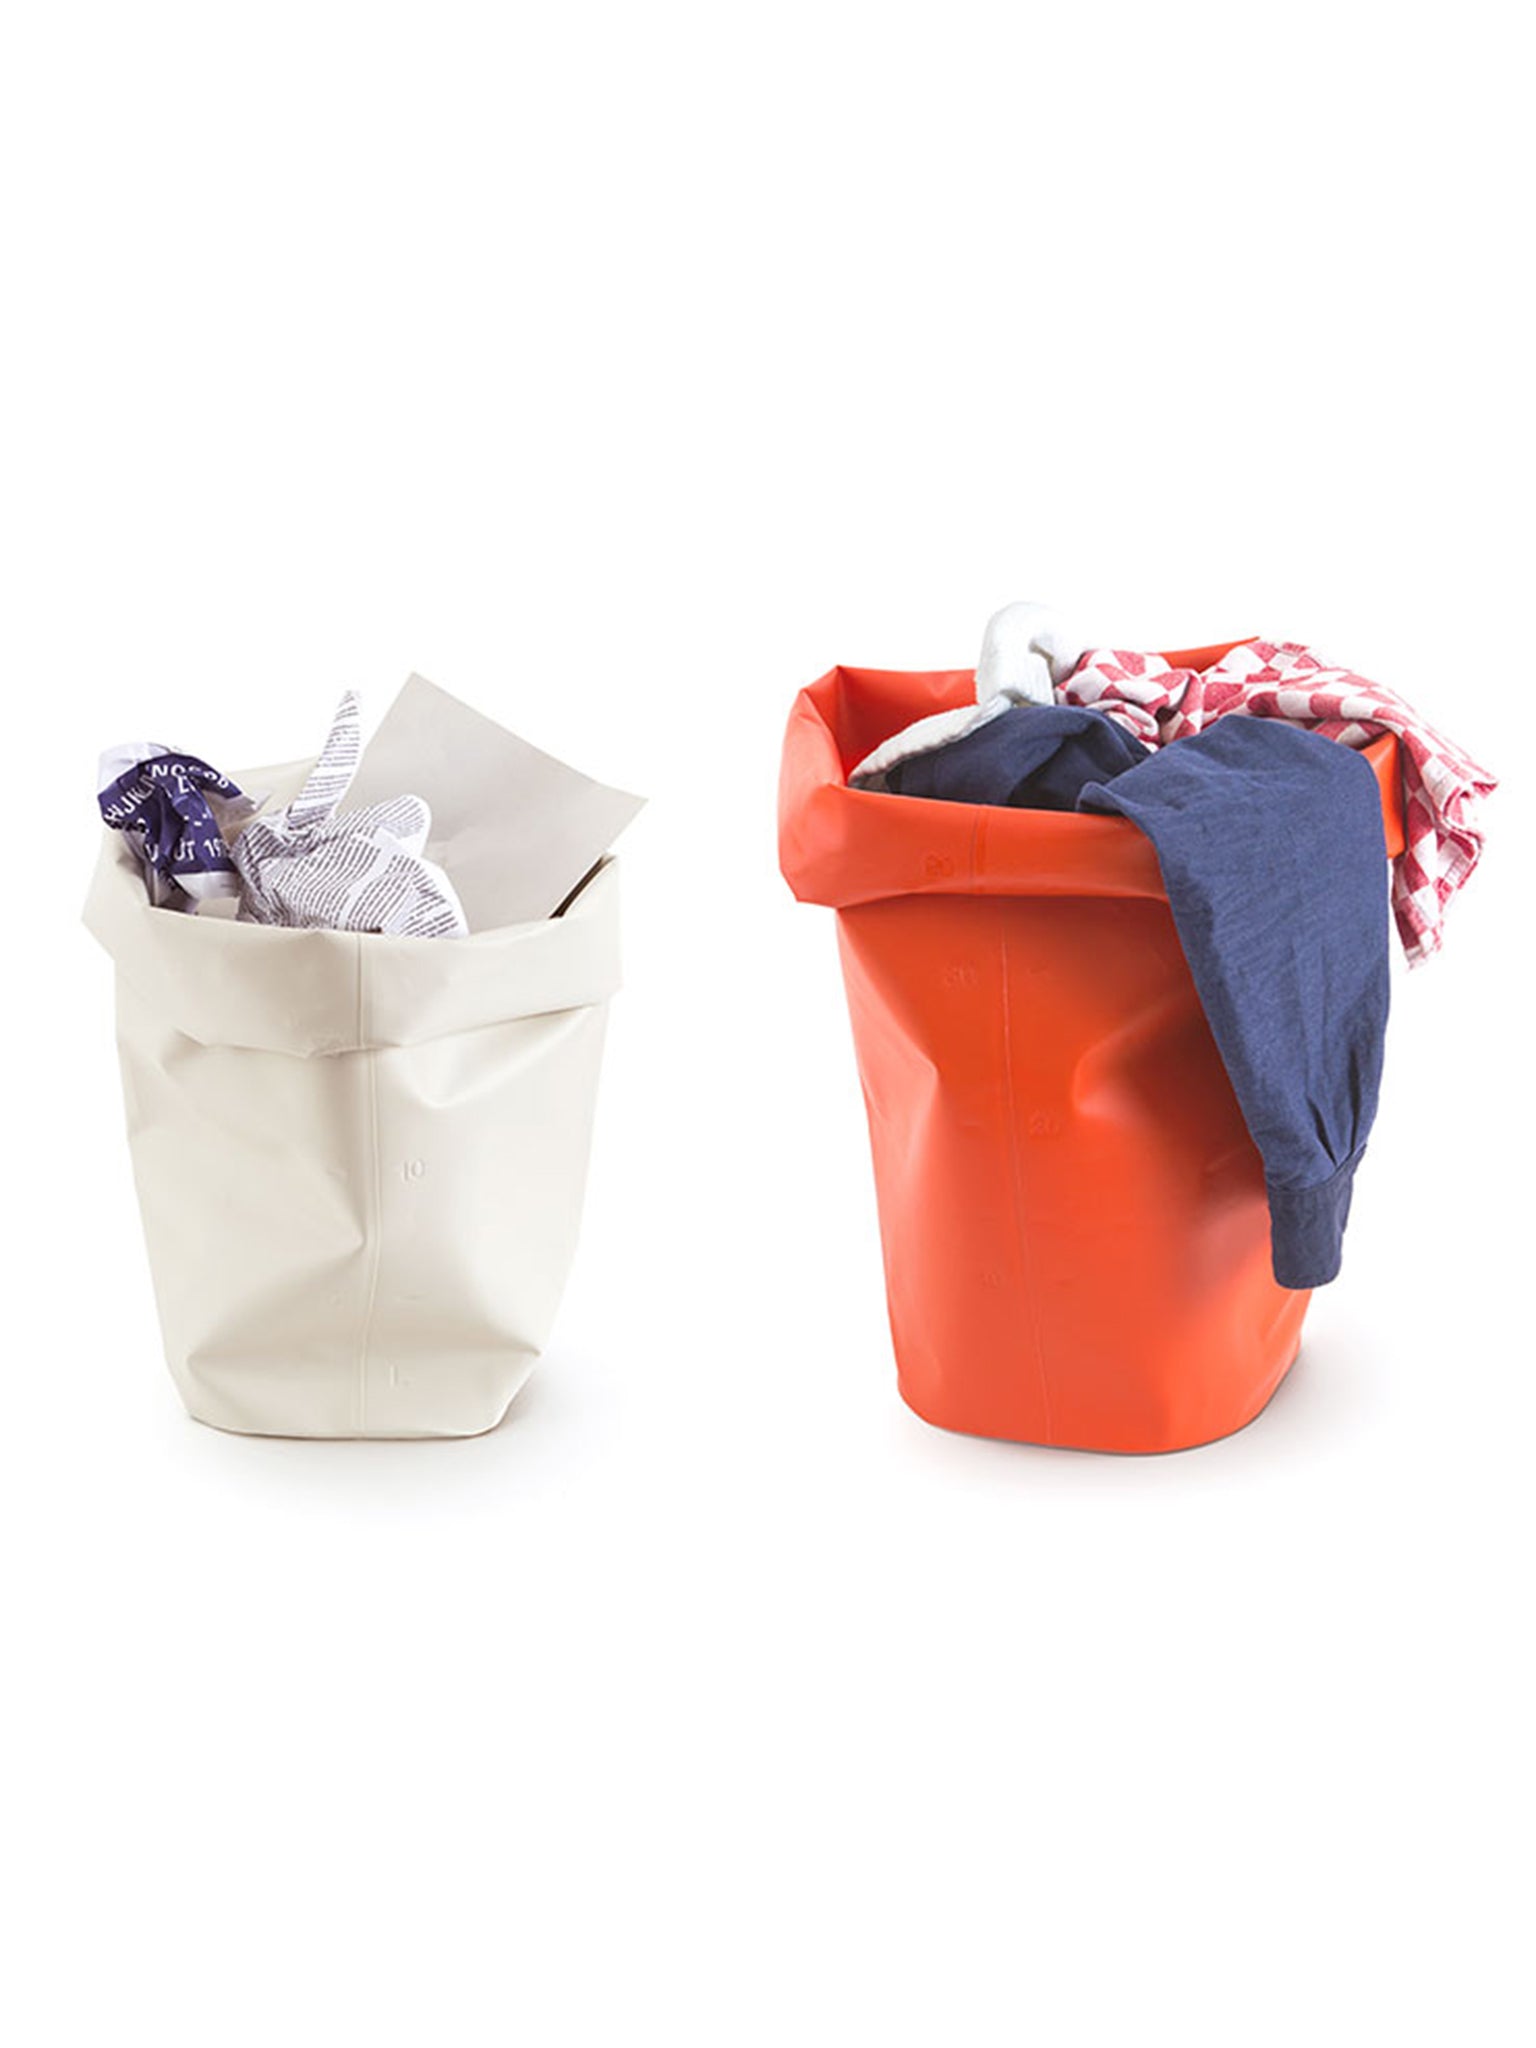 L&Z Roll-up bin medium and large